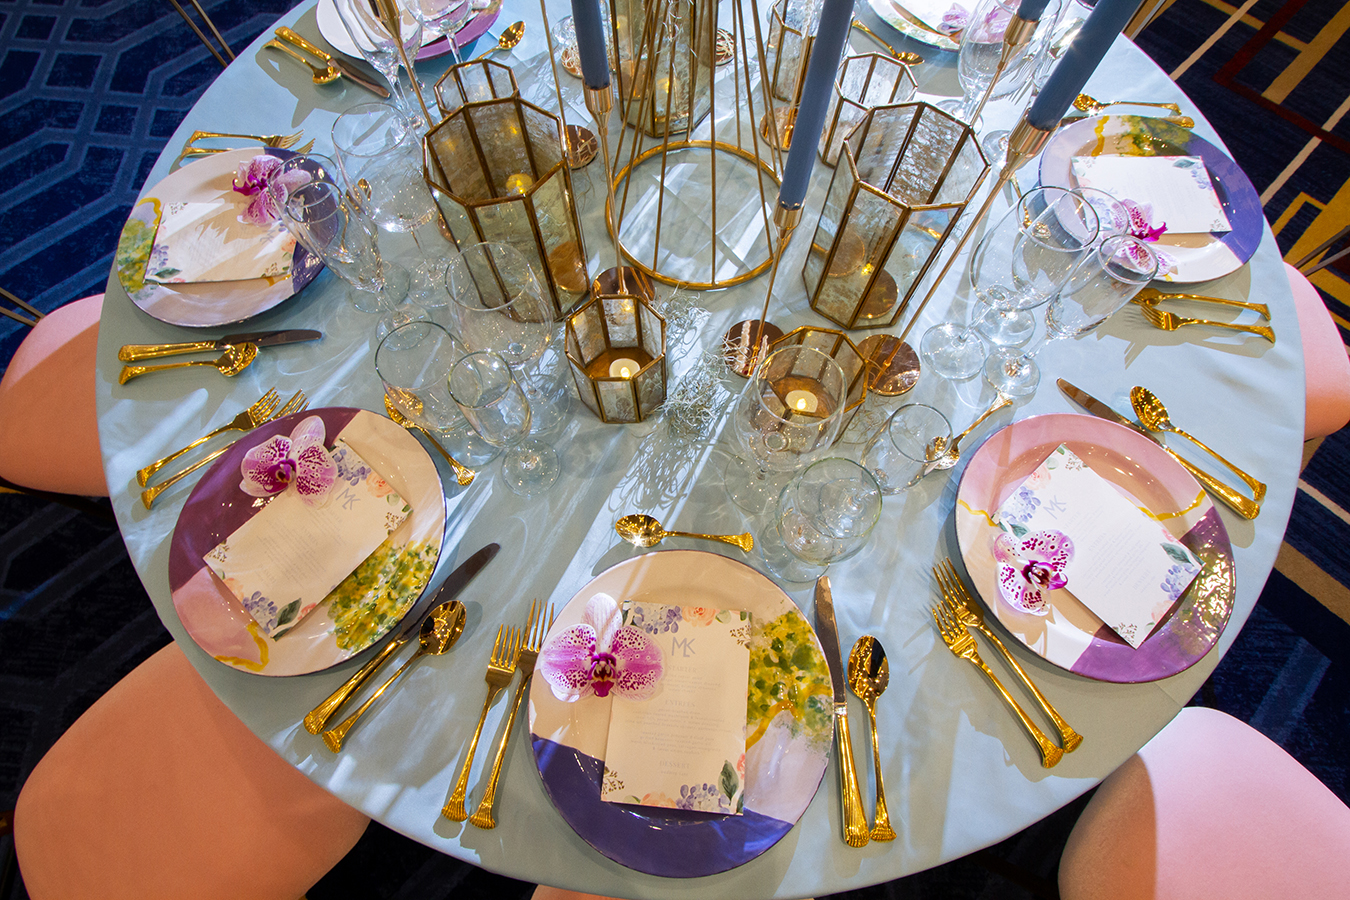 Hand-painted plates from Chez Clay | Watercolor menus by Invitobella | Rentals by True Value Rental | Florals by Mitch's Flowers